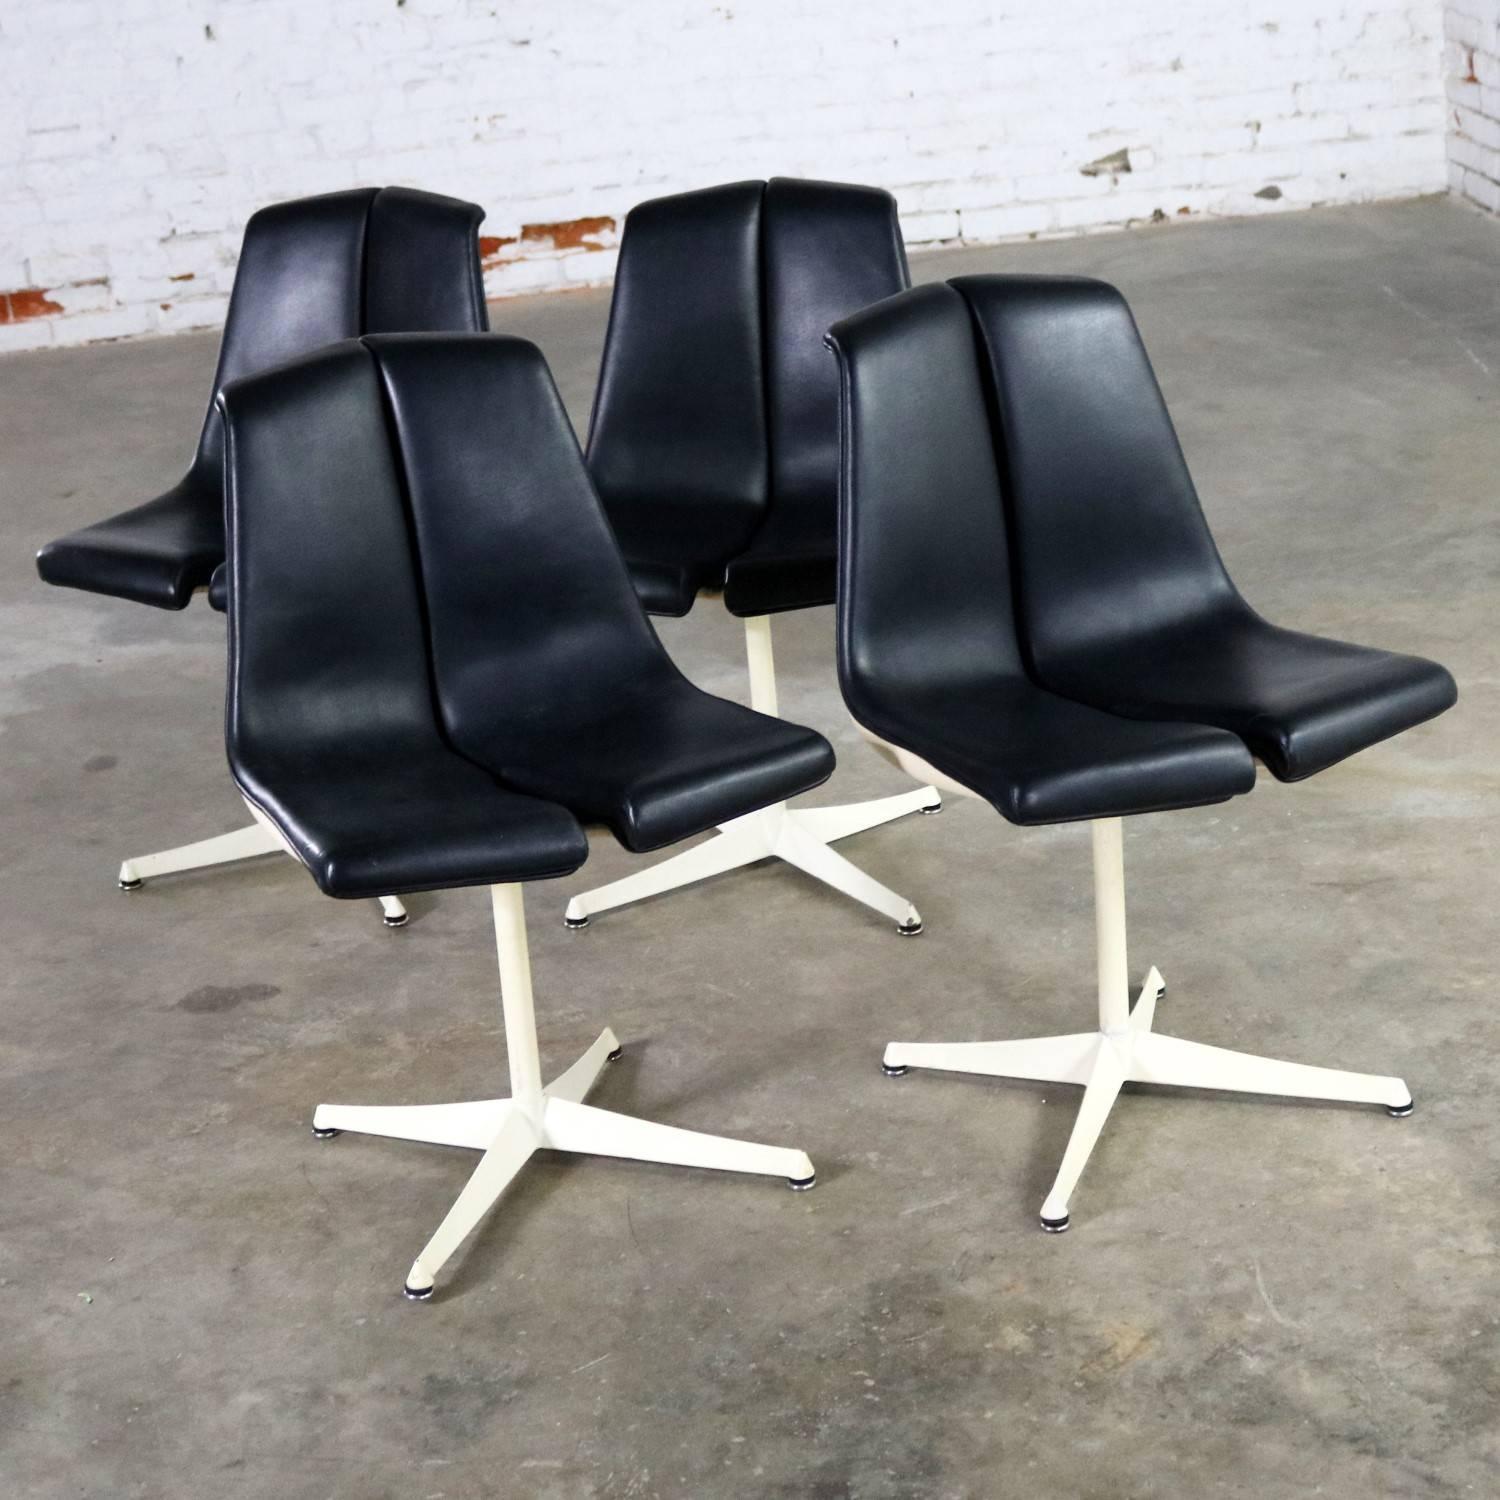 Incredible set of four I48 stacking chairs by Richard Schultz for Knoll. This set is in wonderful vintage condition. The black faux leather or Naugahyde is in fabulous shape; however, the white finish on the shells, shaft, and feet has some